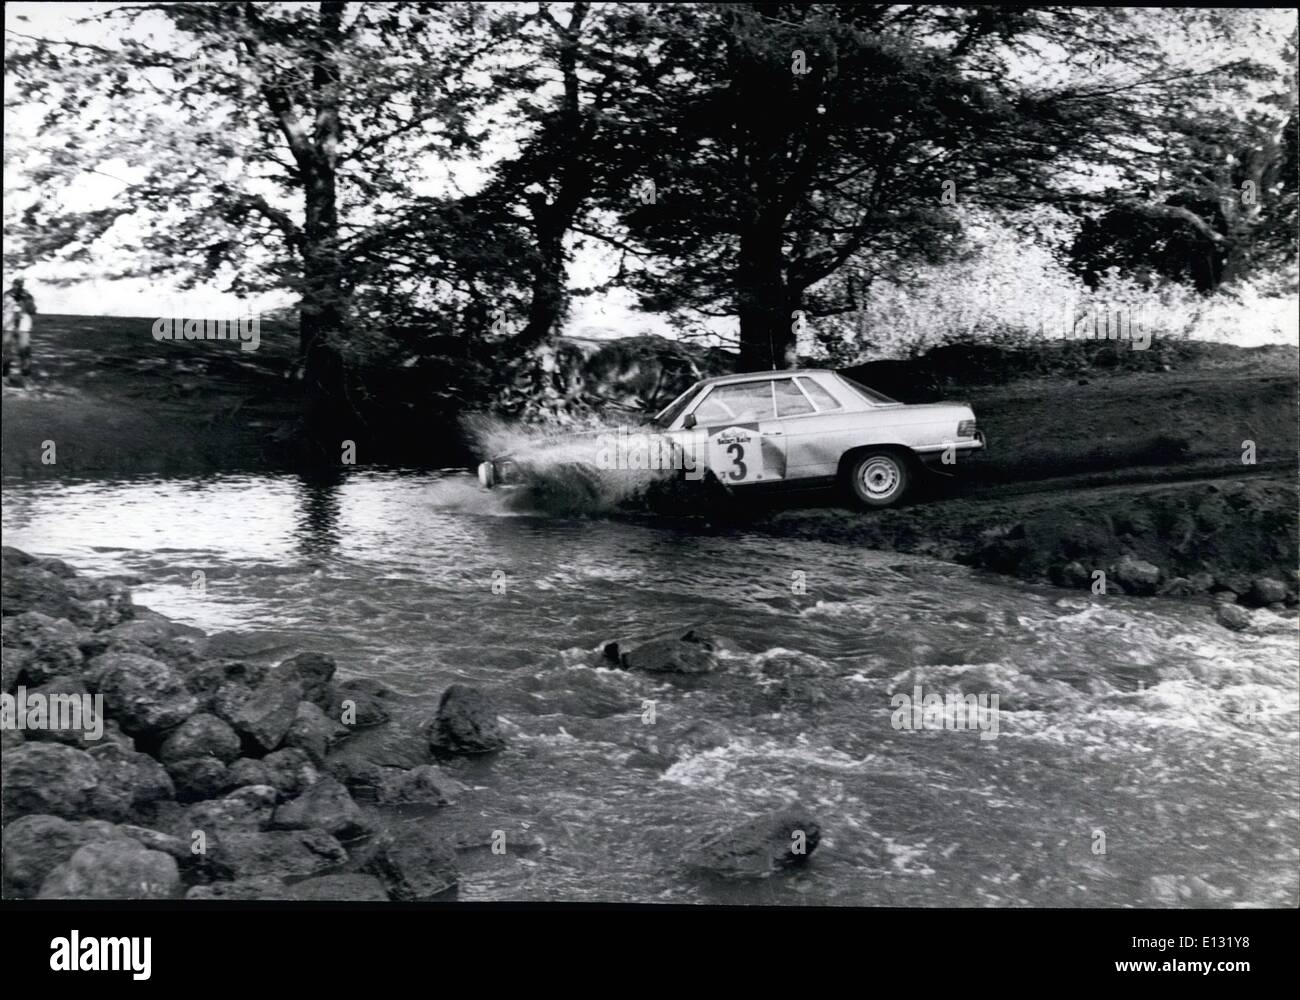 Feb. 26, 2012 - Bjorn Waldegaard in car Number 3, a Mercedes 450 SLC works model,. with battered left side door, negotiates a river in the driest ever Safari, Waldegaard who complained of steering difficulties throughout the third leg after leading throughout almost the second leg had more misery as he approached the Runvenjes section on Mt Kenya in the final stages. Three bolts sheared on his front axle and it was discovered the threads on his rear axle were gone also and there was no spare axle left. Waldegaard, reigning world rally oampanion. limped home in tenth place. Stock Photo